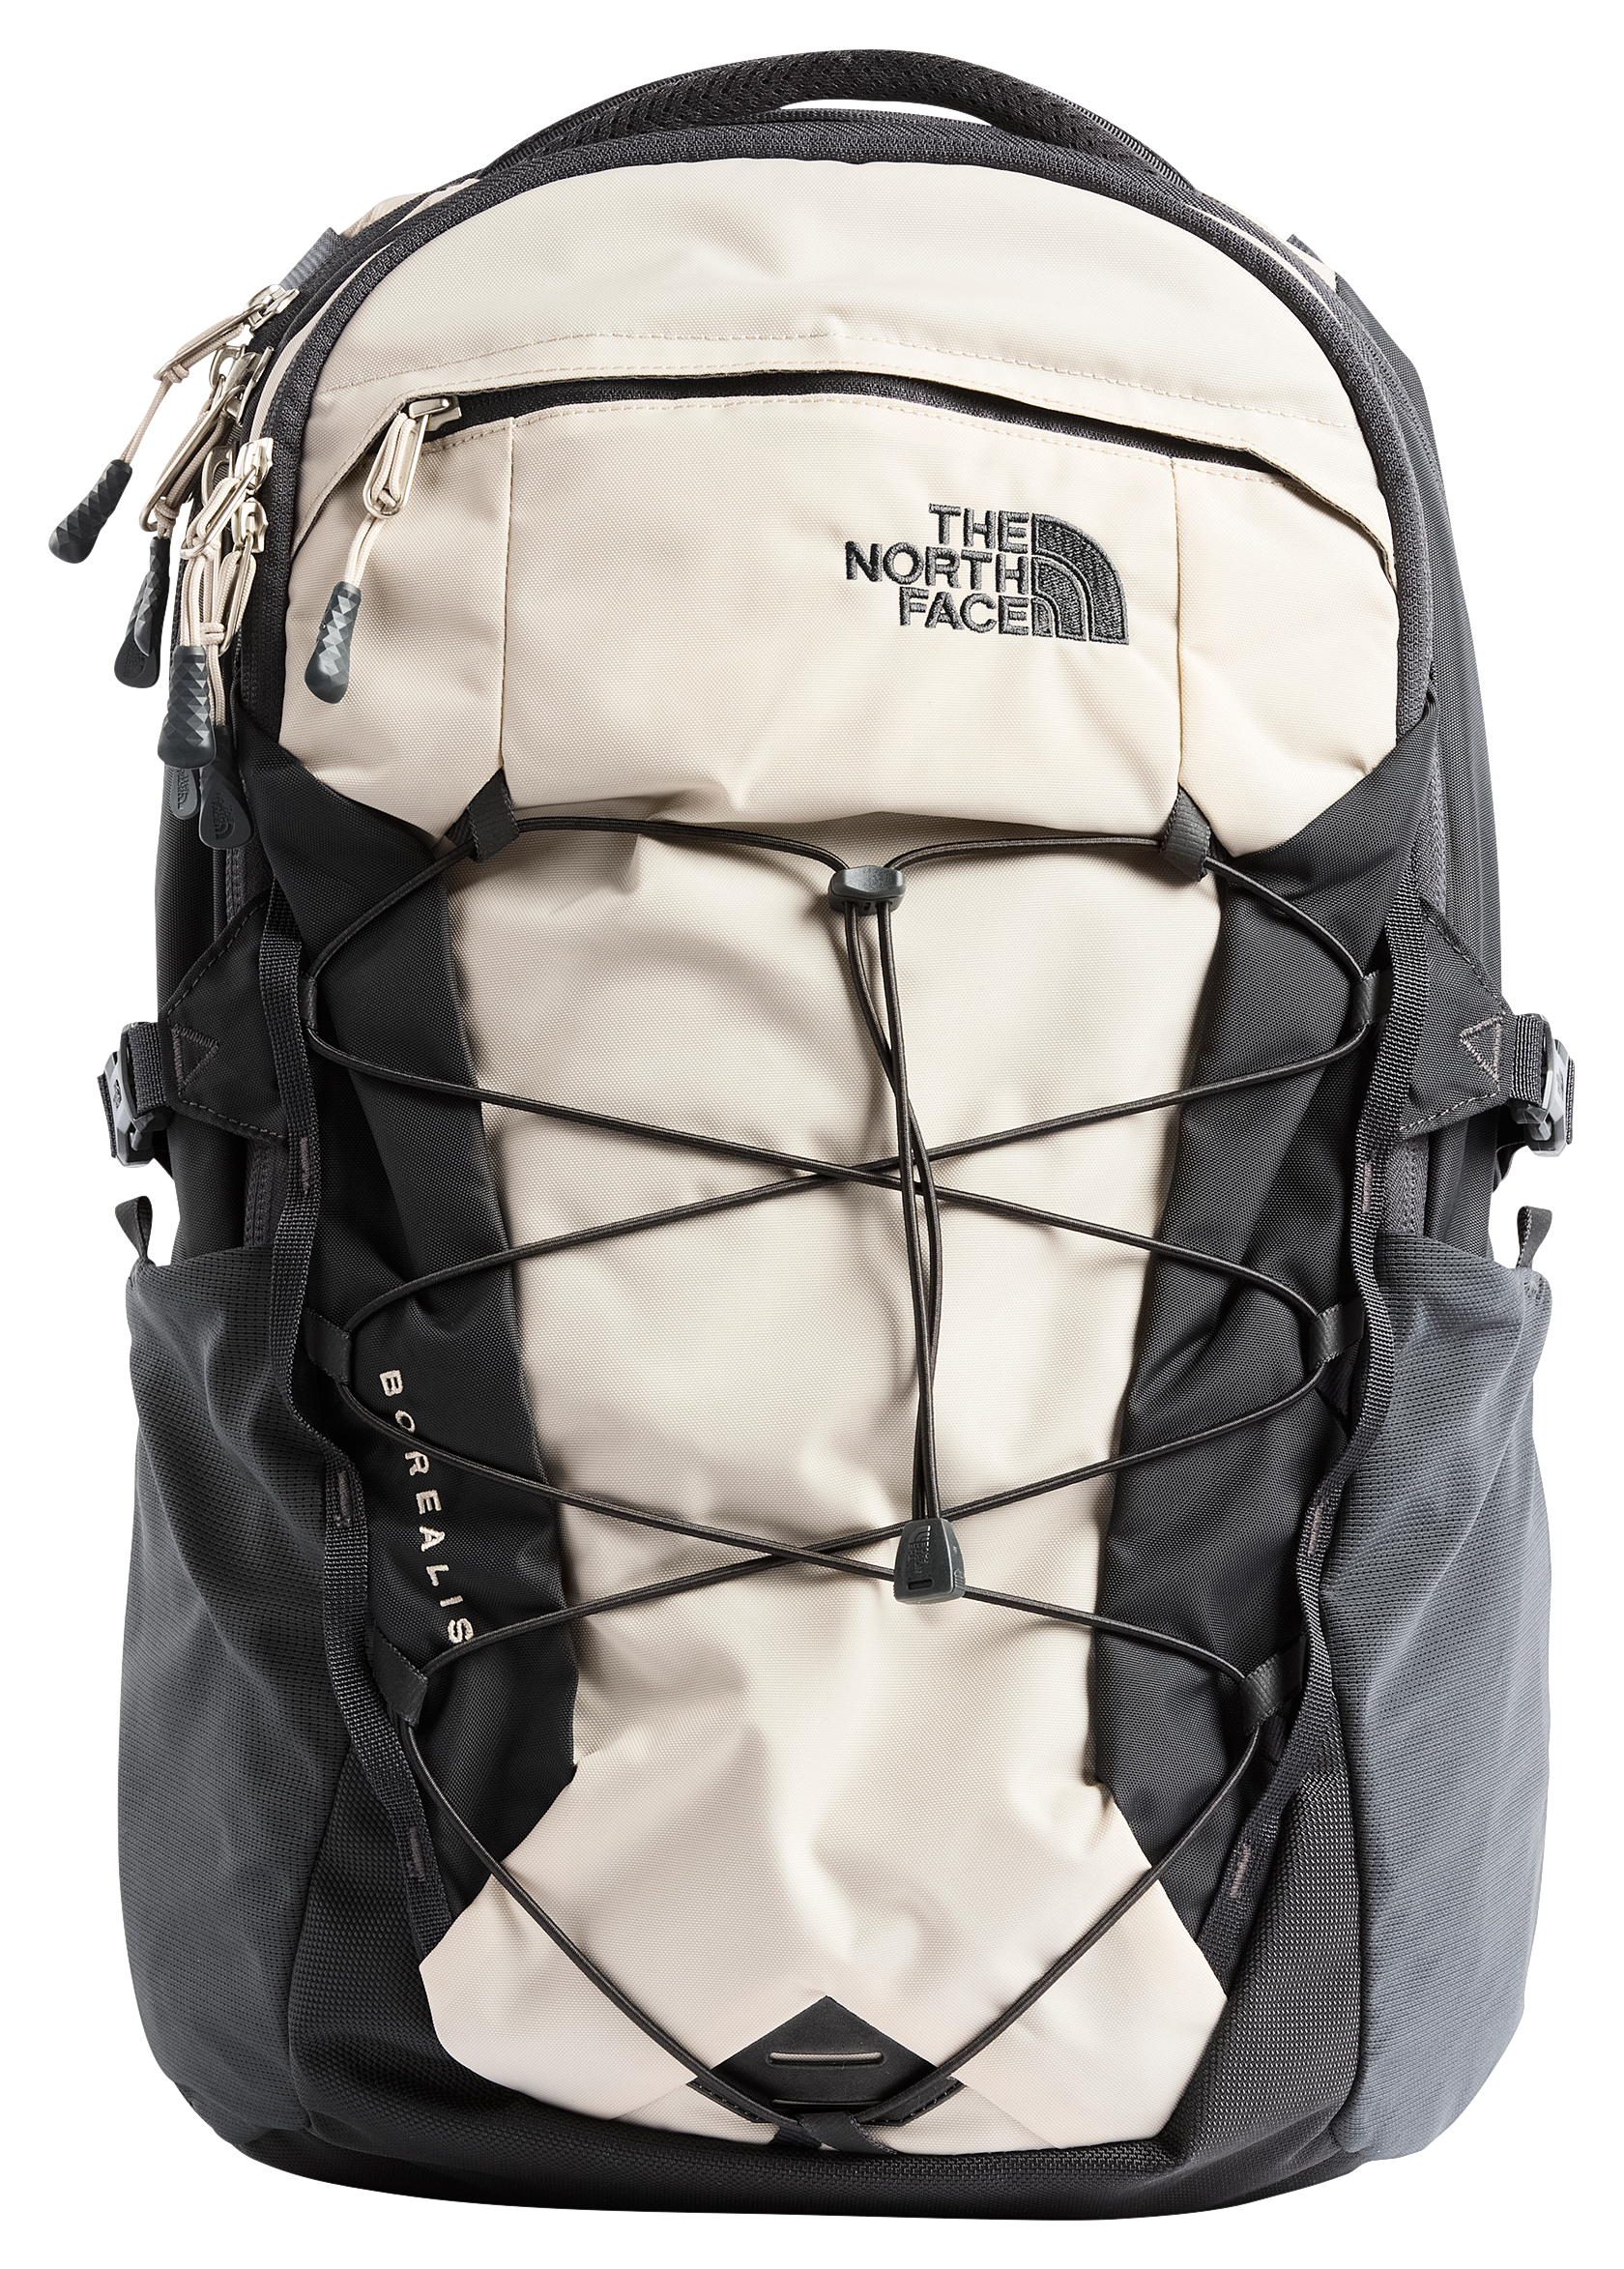 The North Face Borealis 28L Backpack | Bass Pro Shops